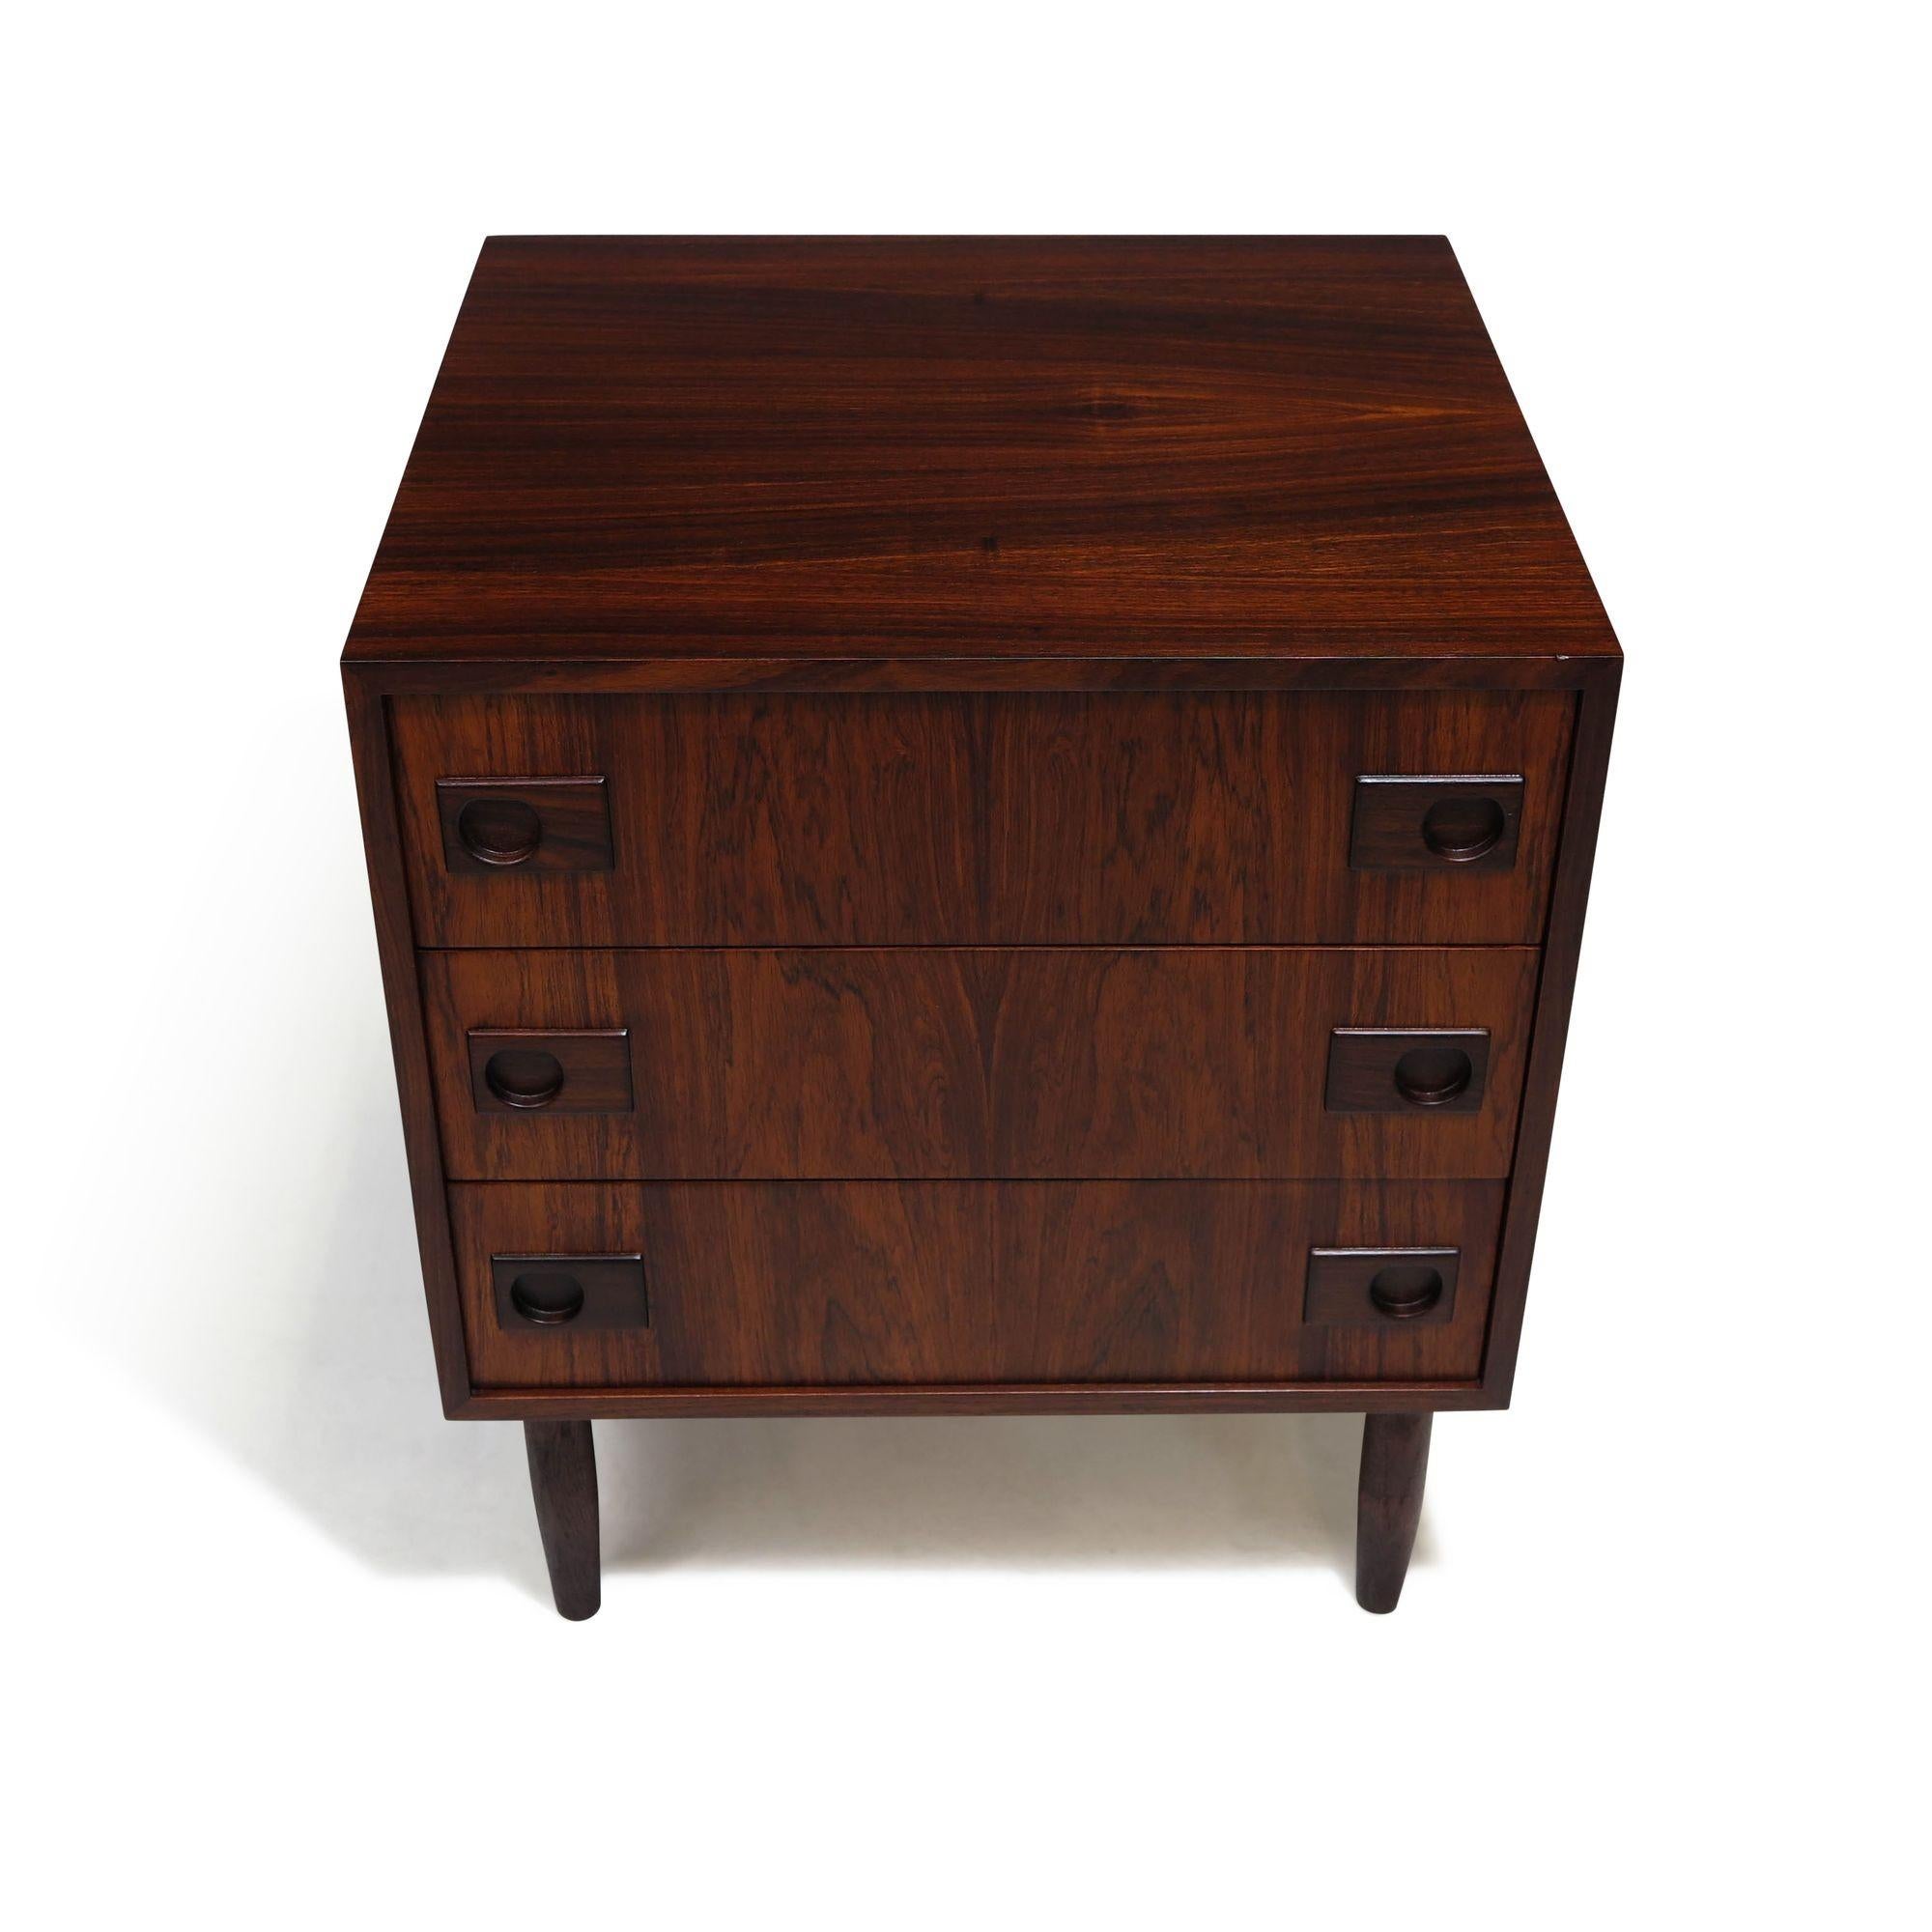 E Brouer Danish Rosewood Nightstand with Drawers In Excellent Condition For Sale In Oakland, CA